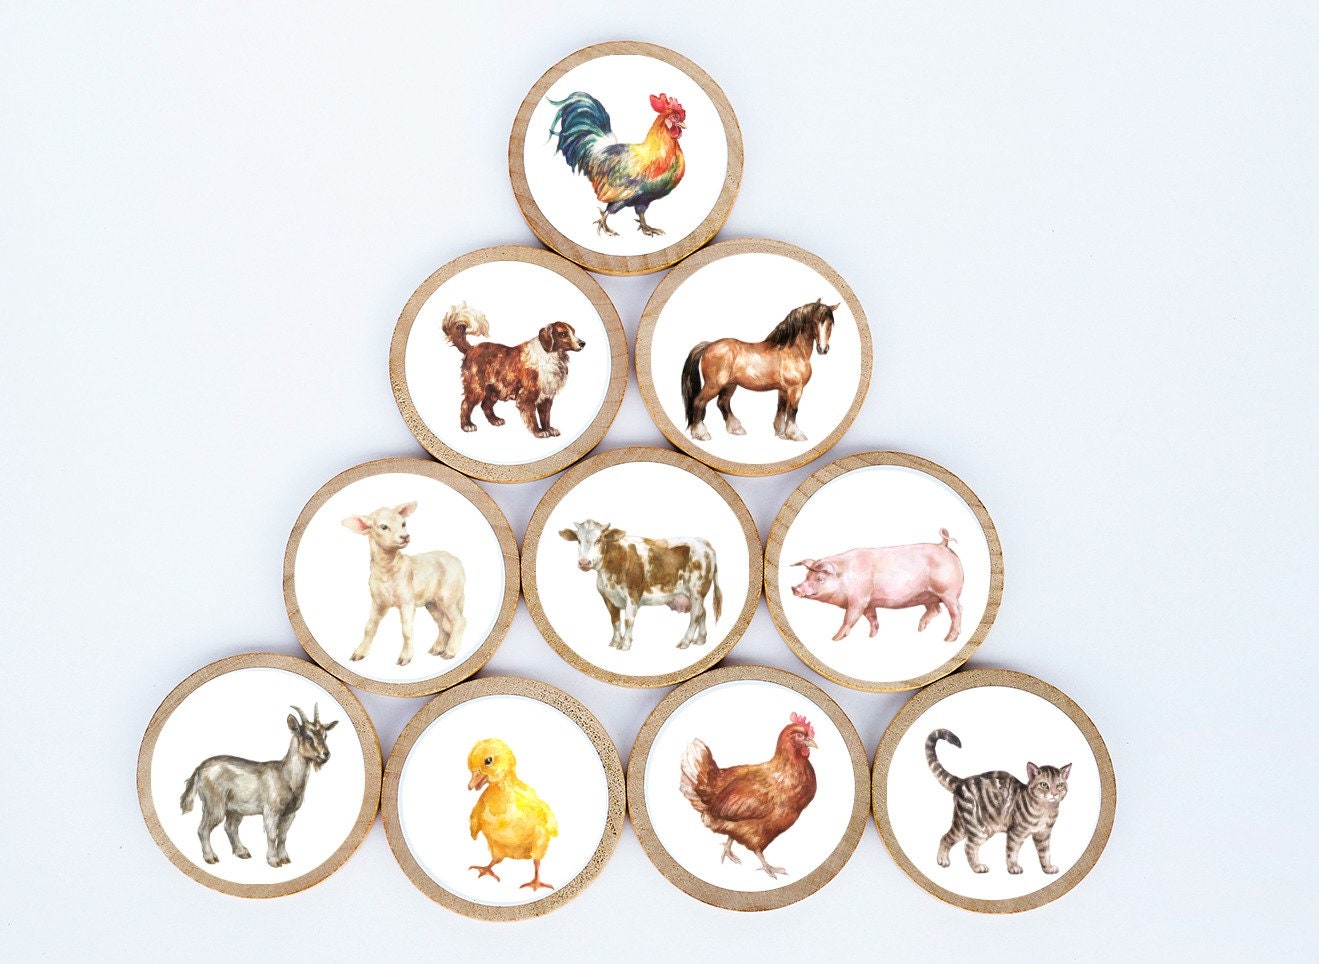 Chick Butt Magnet Funny Chicken Butt Fridge Magnets Decor for Refrigerator  Set of 3 Magnetic Home Accessories Gift Handicraft - AliExpress